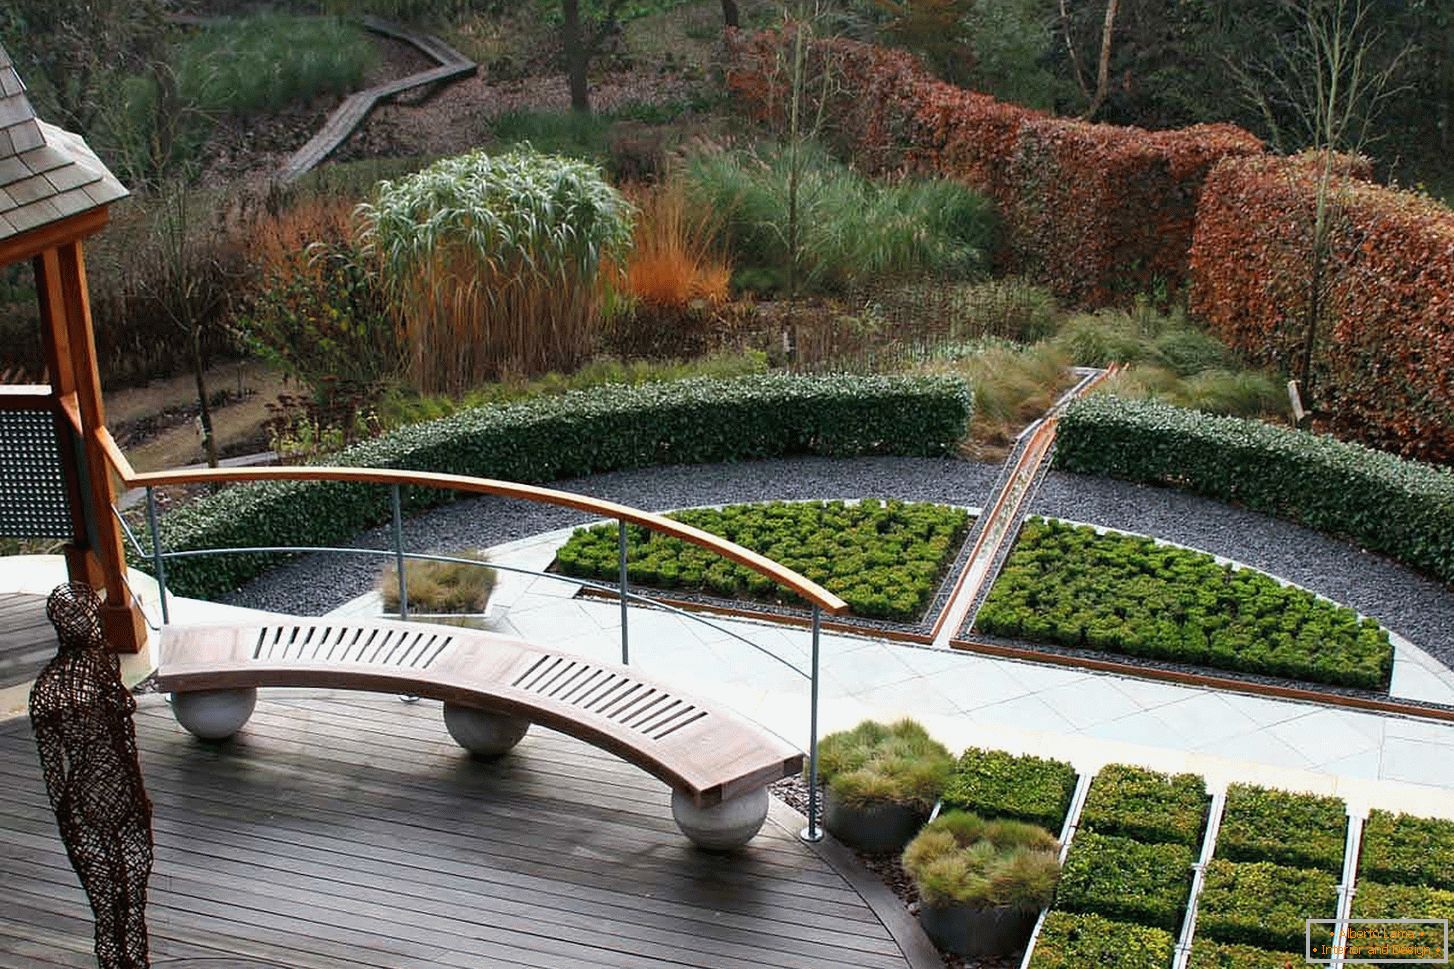 Landscaping in high-tech style